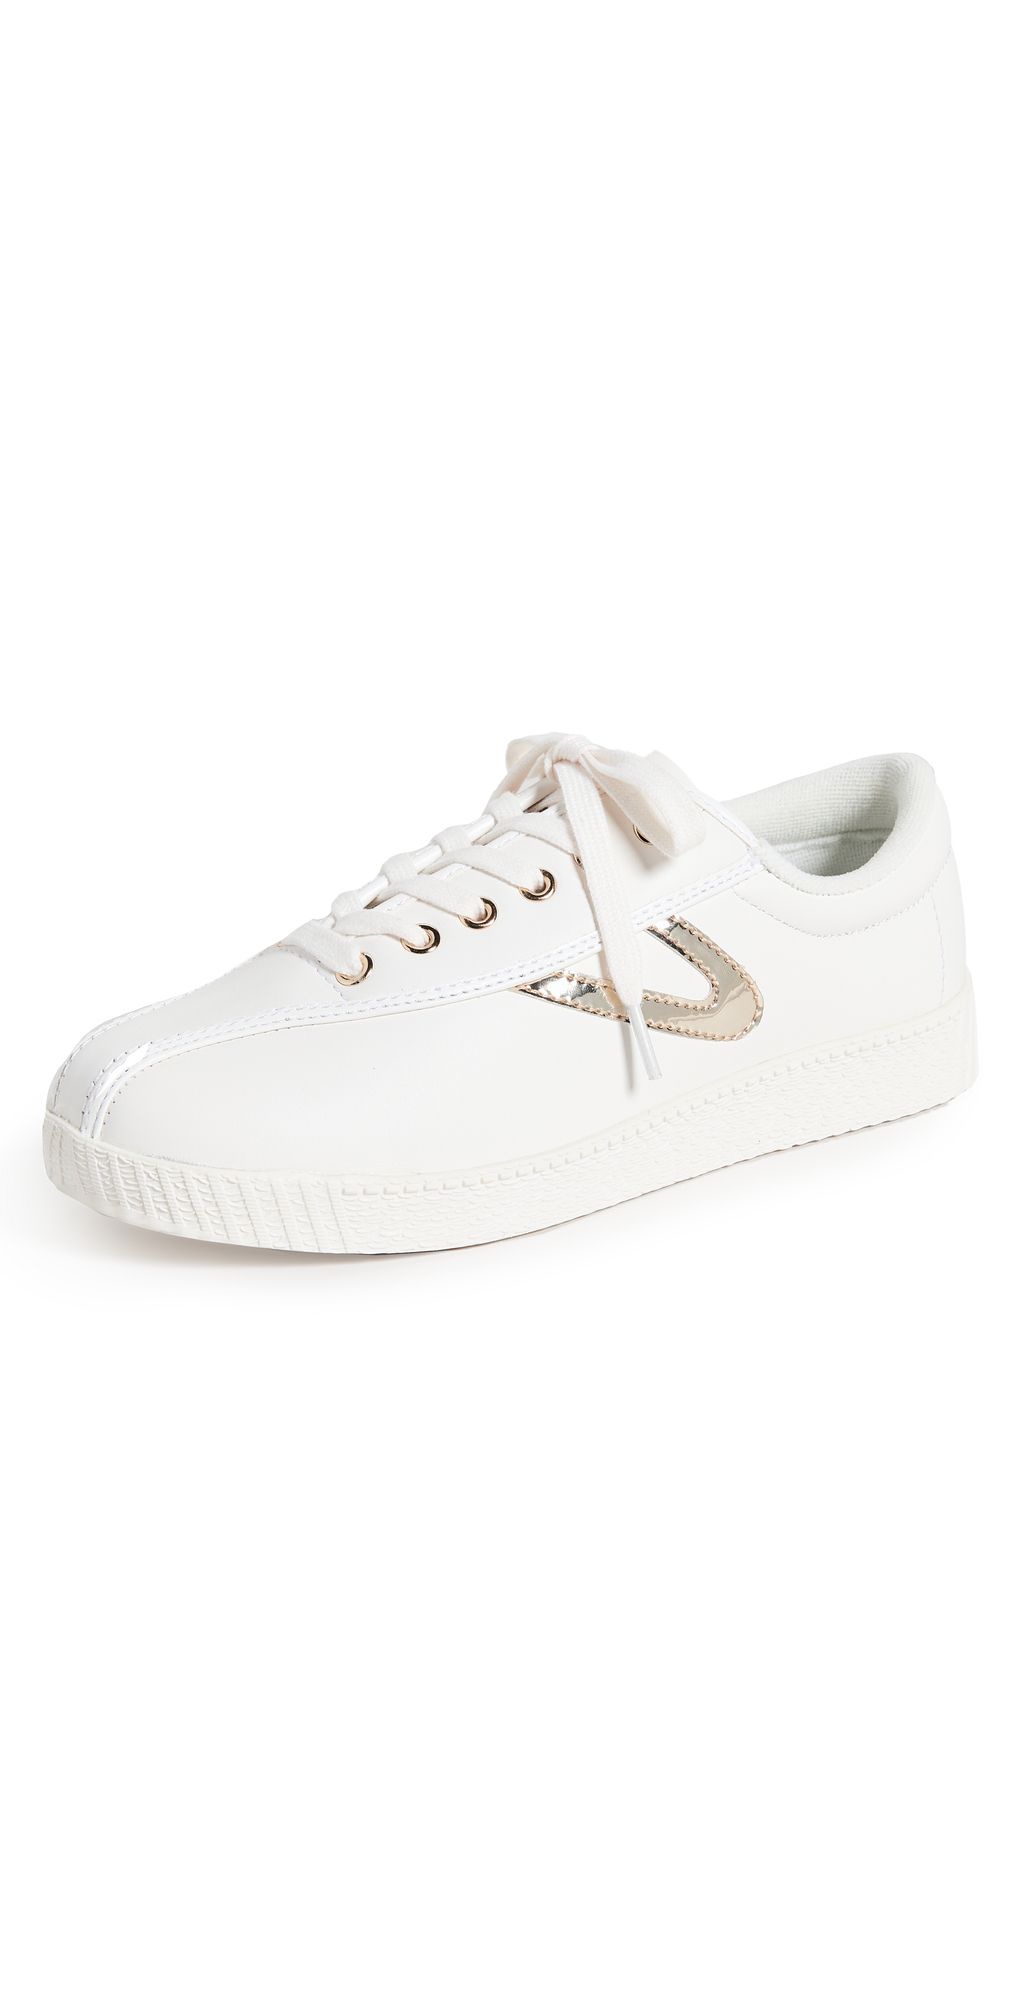 Nylite Plus Leather Sneakers | Shopbop